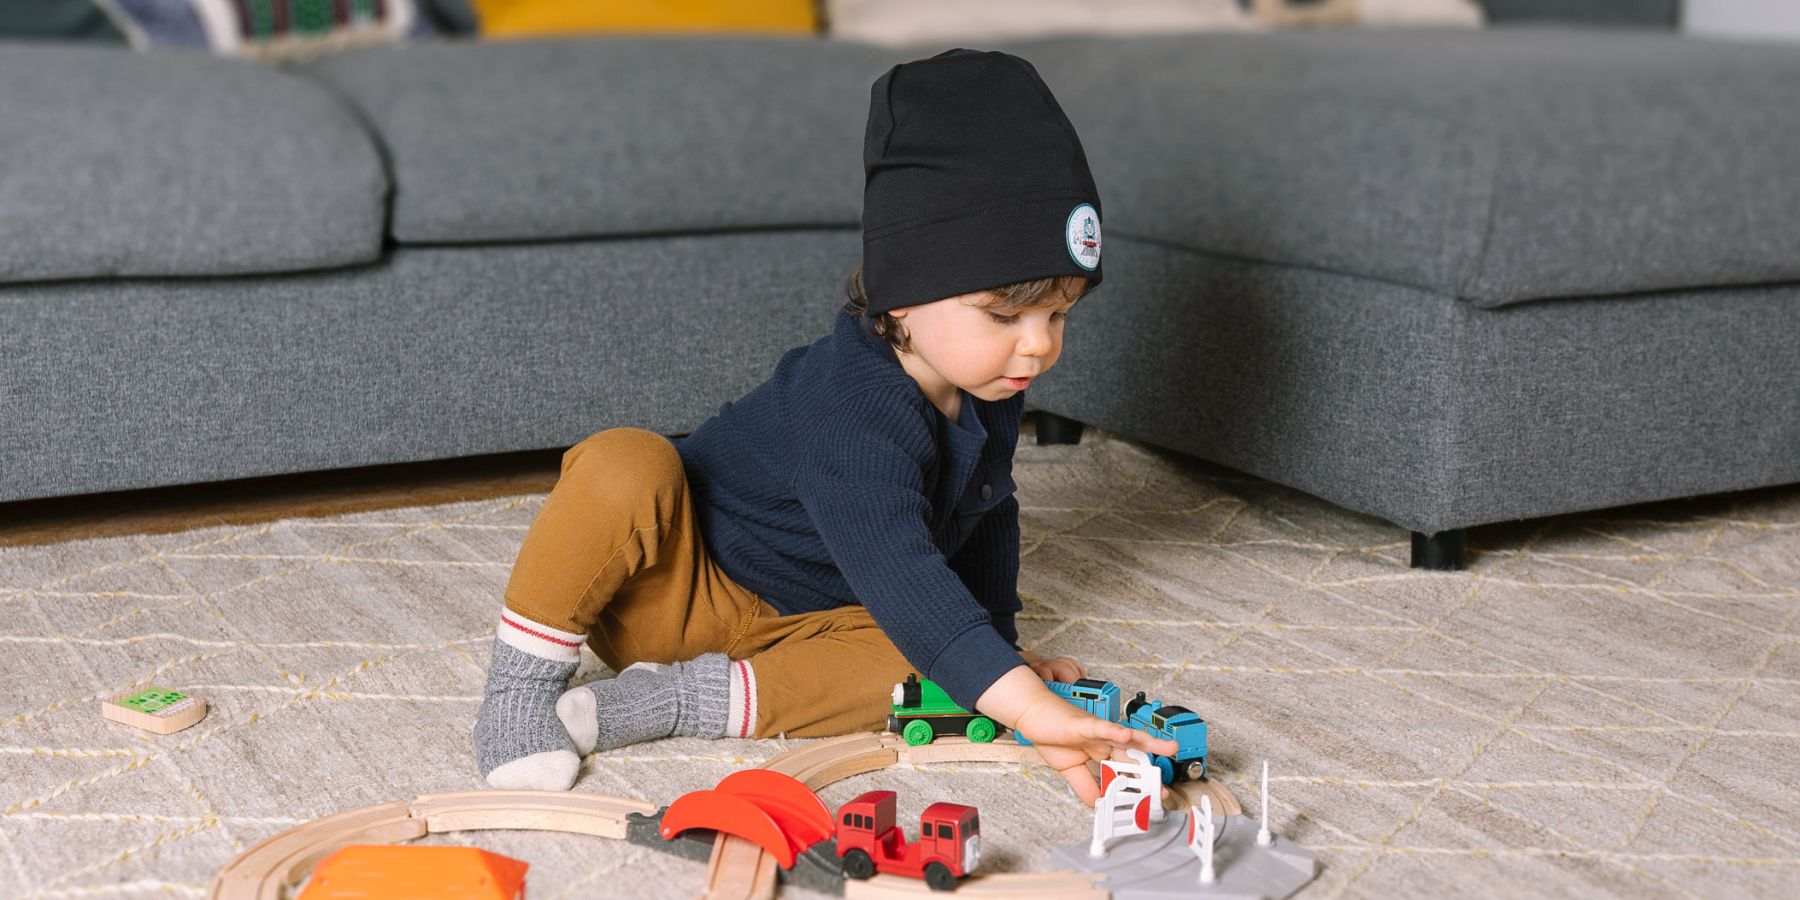 Infant and Toddler Organic Cotton Beanies for cooler days. Choose from organic cotton jersey or organic cotton sherpa. Made in Canada by Puffin Gear